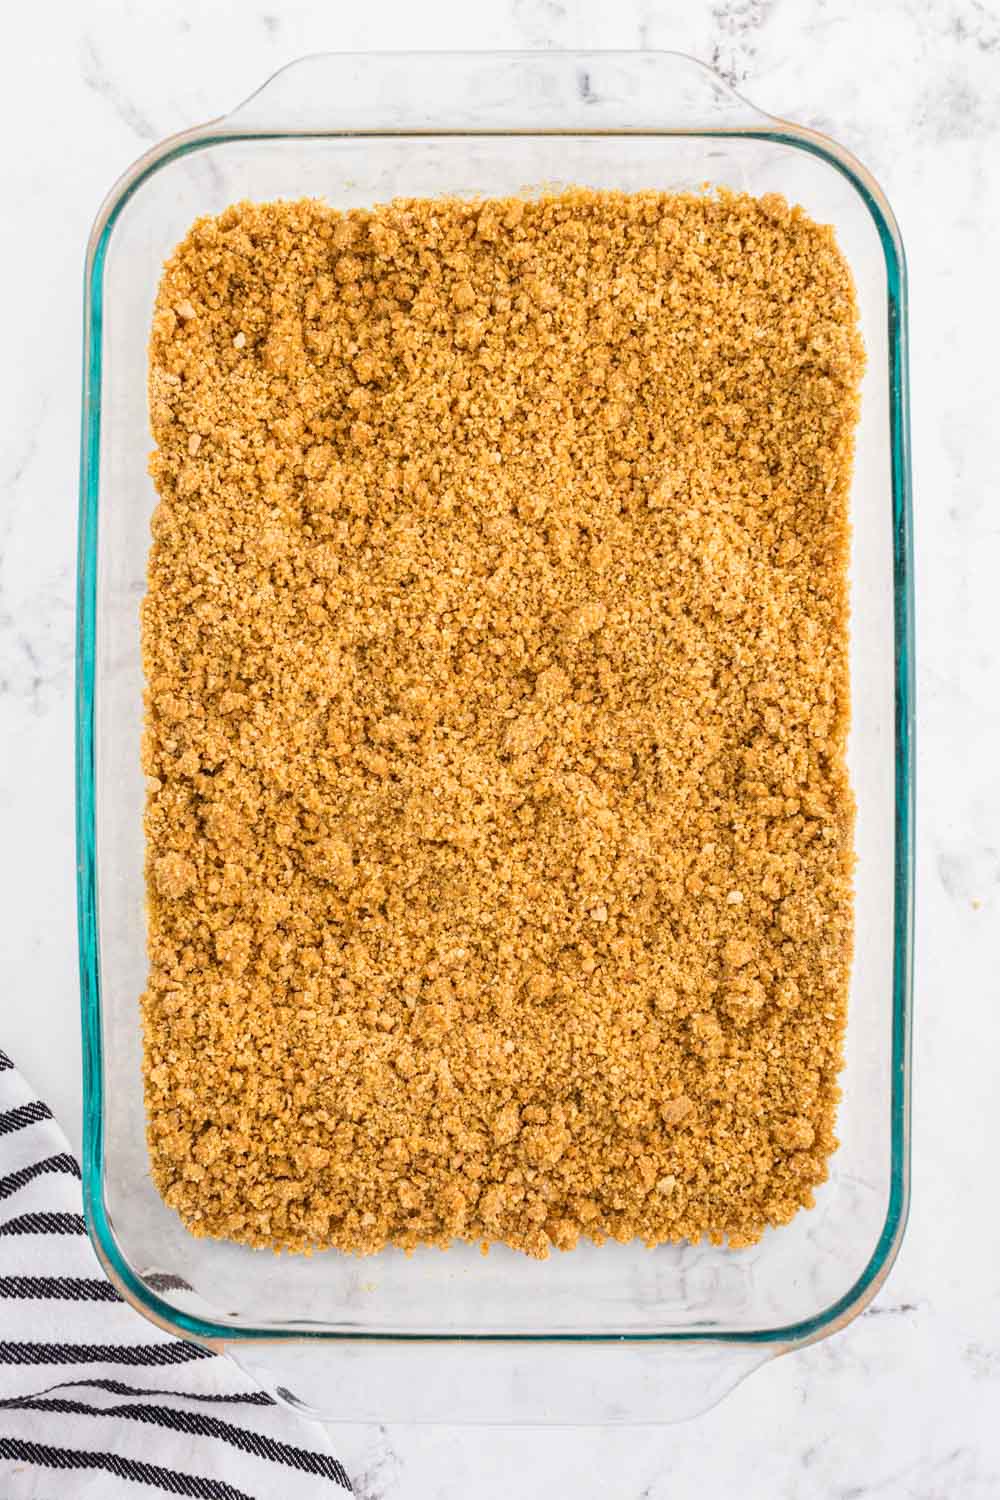 Graham cracker crust mixture added to a 9x13-inch baking dish, striped linen, on a white marble surface.